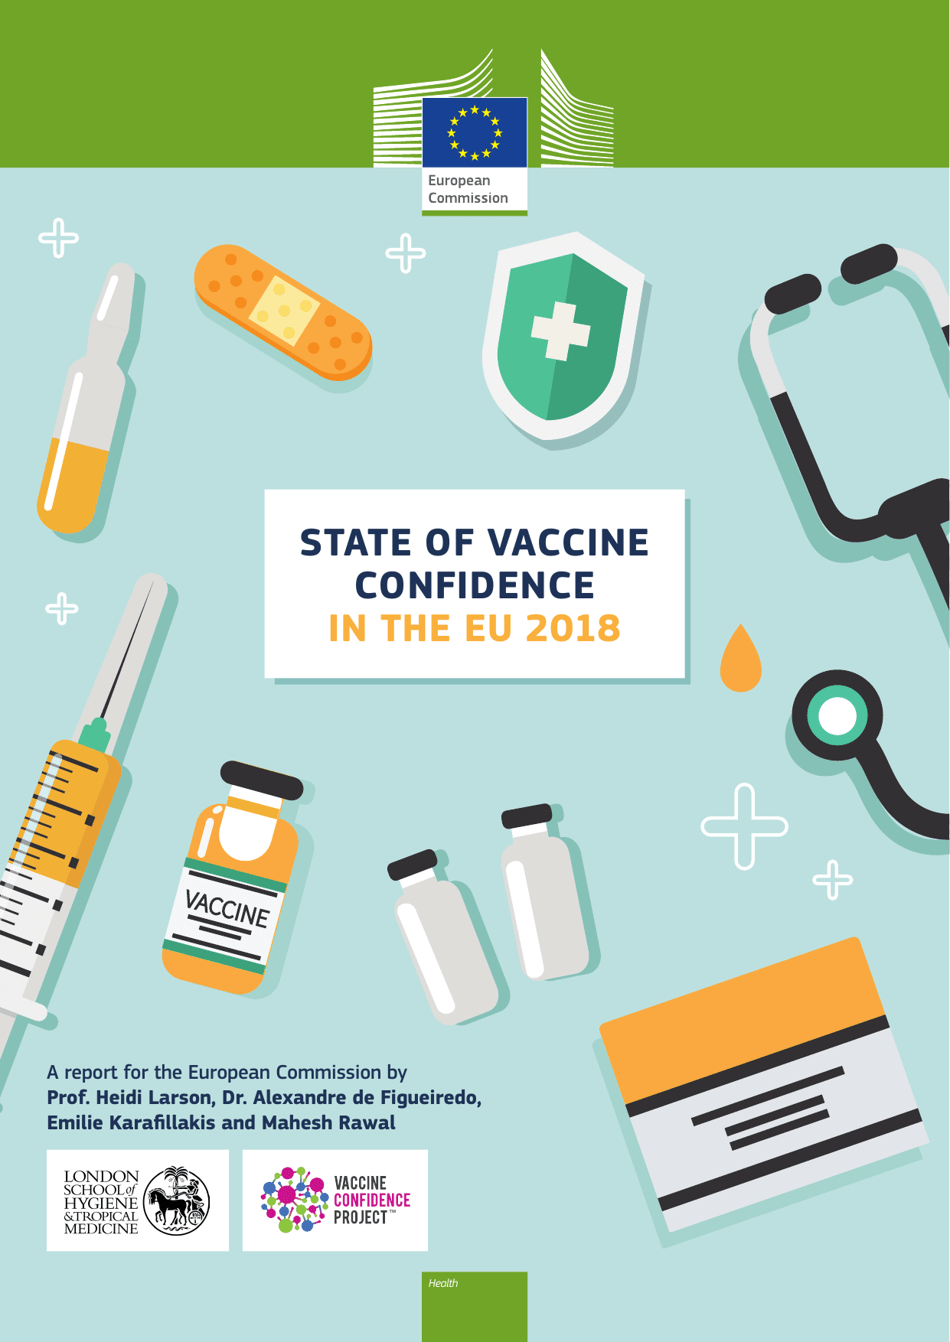 The State of Vaccine Confidence